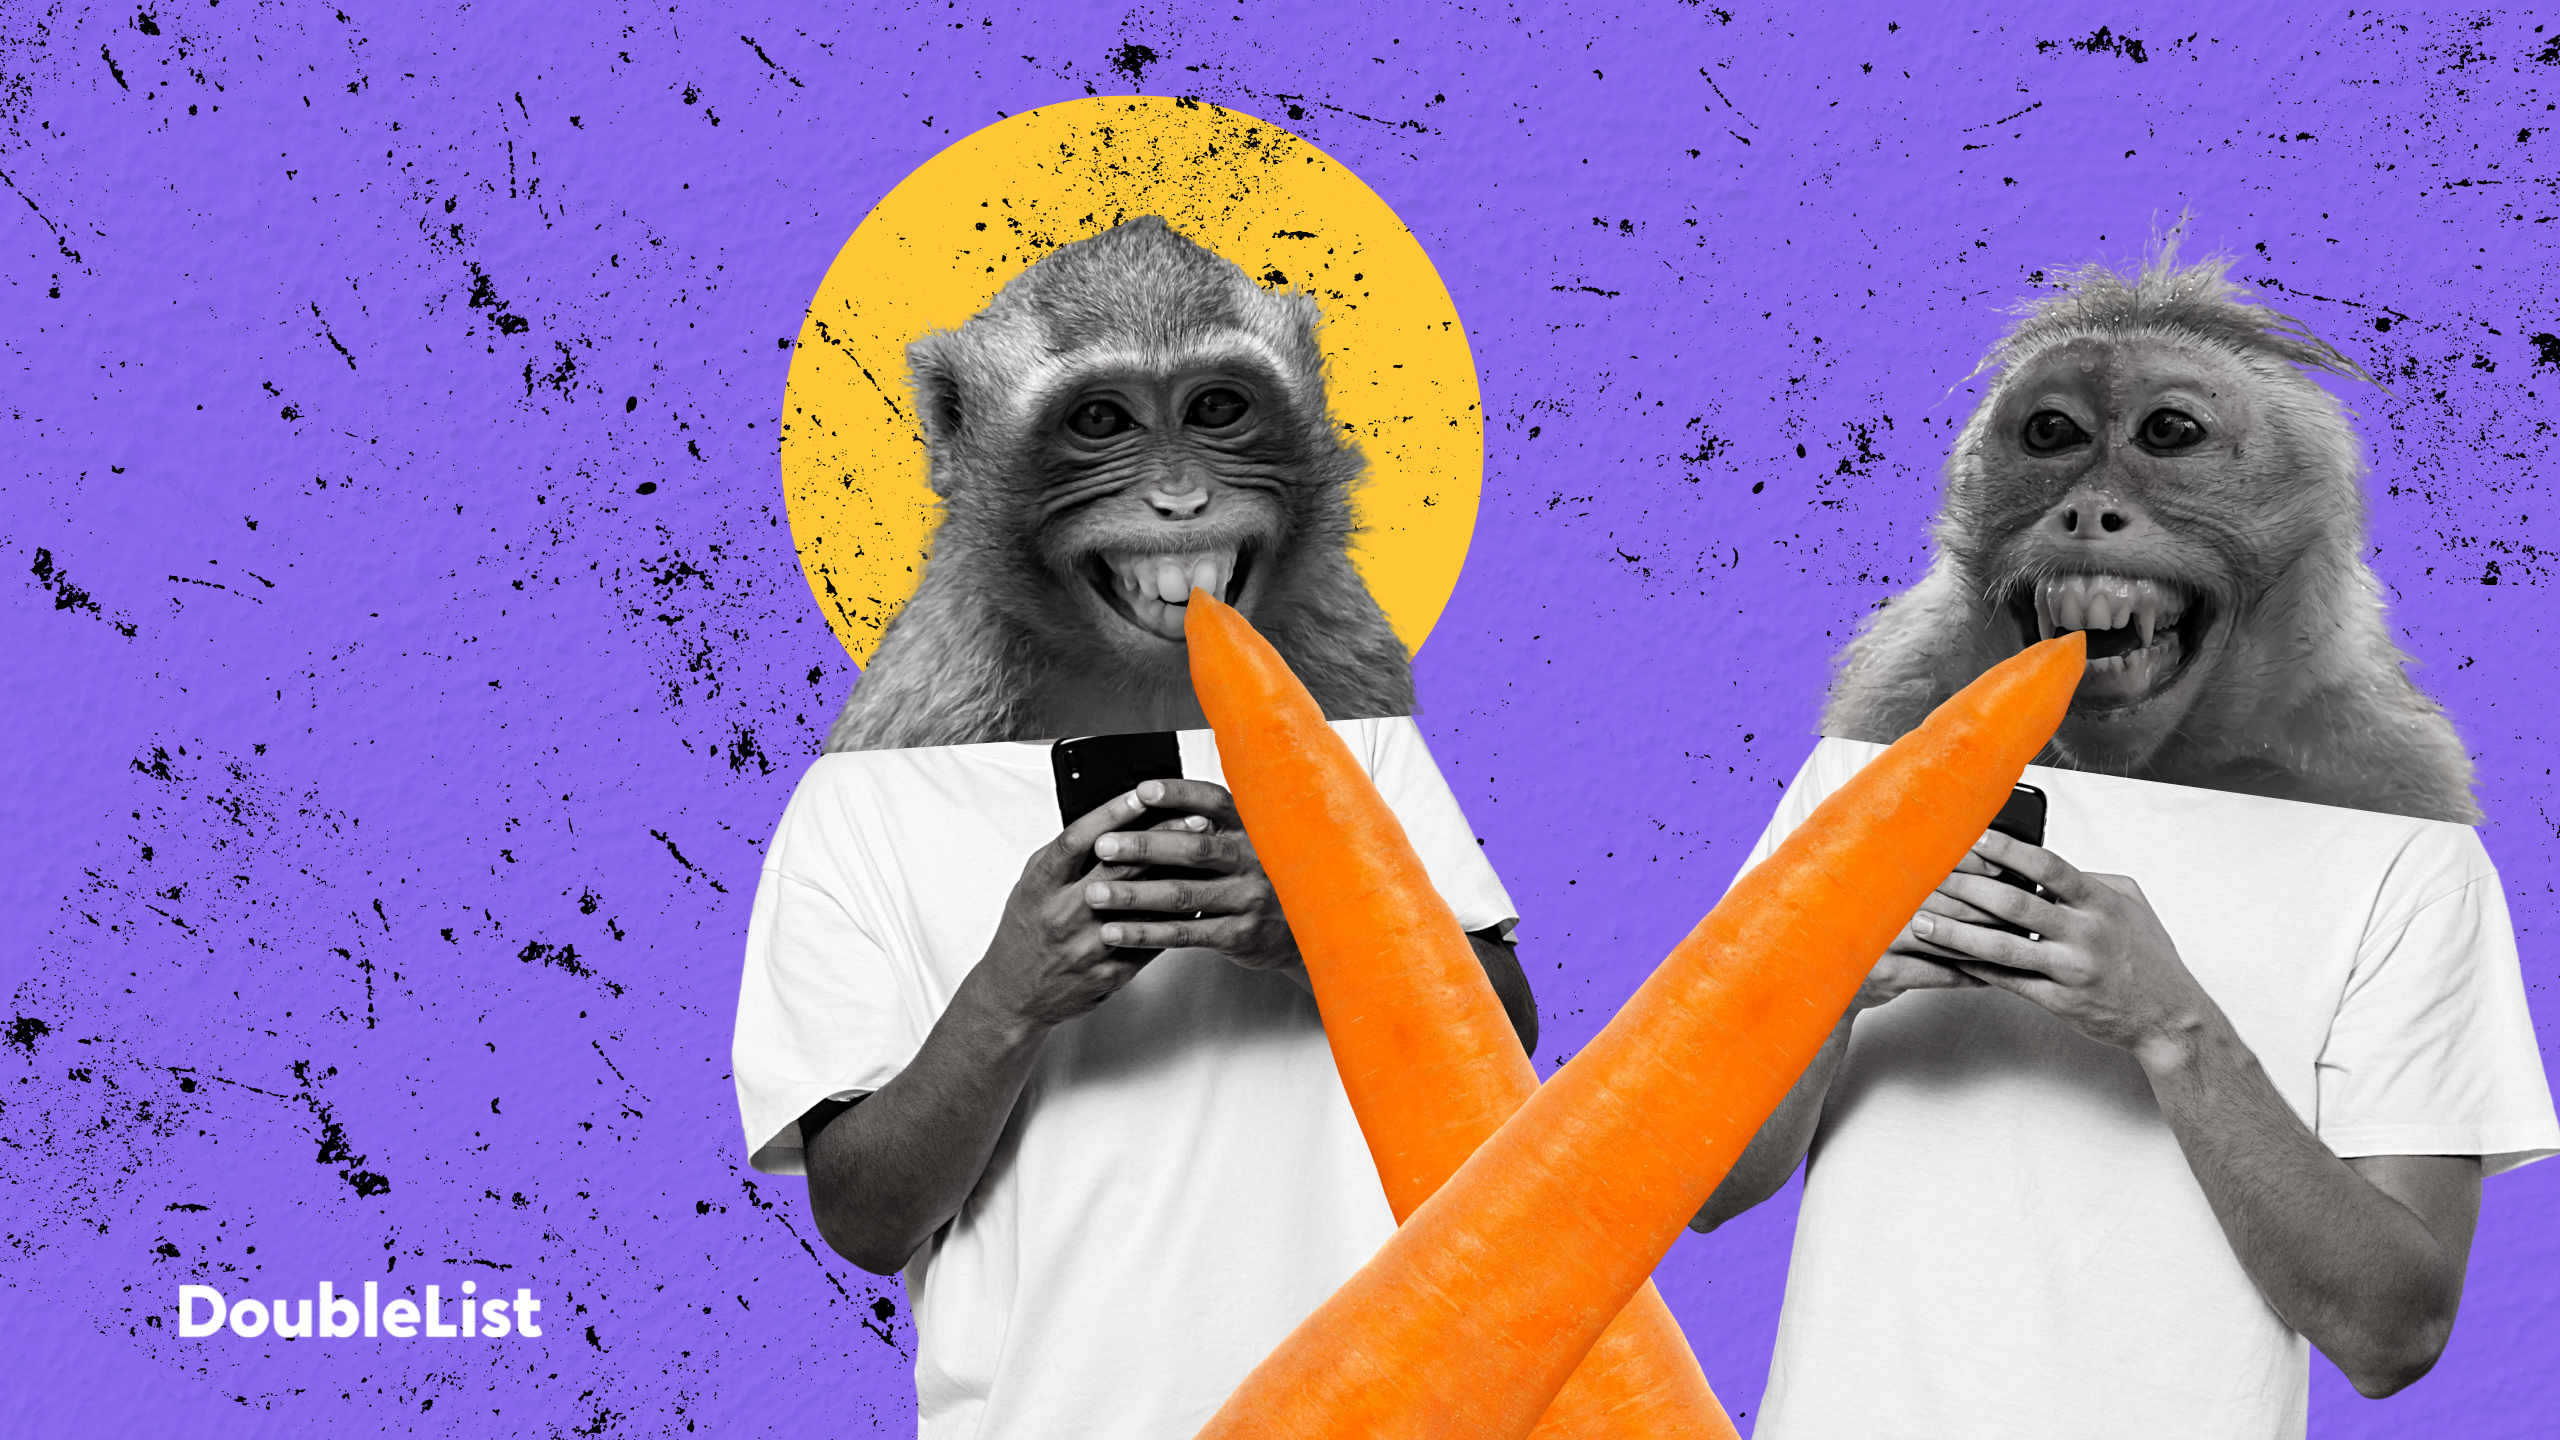 Two monkeys holding carrots representing the best hookup apps, potential hookup partners and other hookup sites.